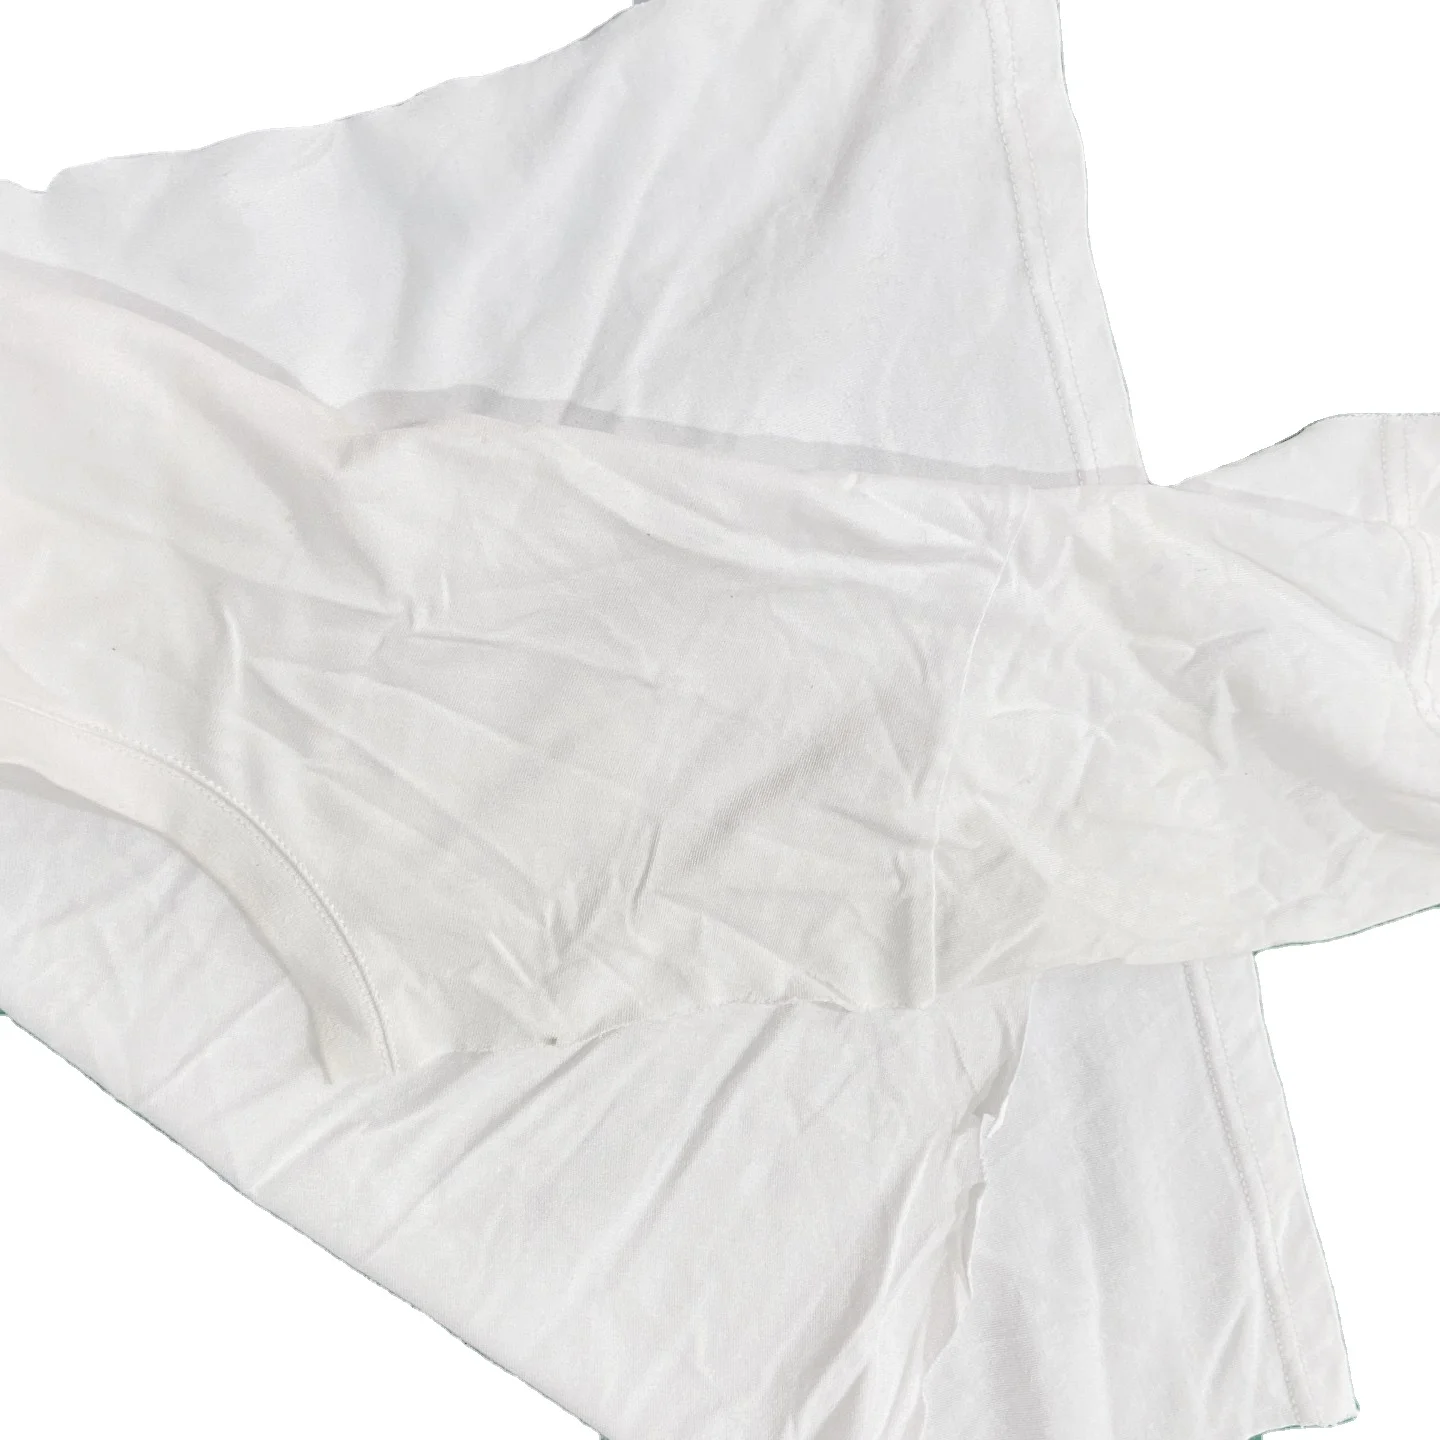 Best quality  White Color T shirt Wiping Rags 80%-100% cotton wiping rags from China 5 kg 10 kg 20kg 100kg bale